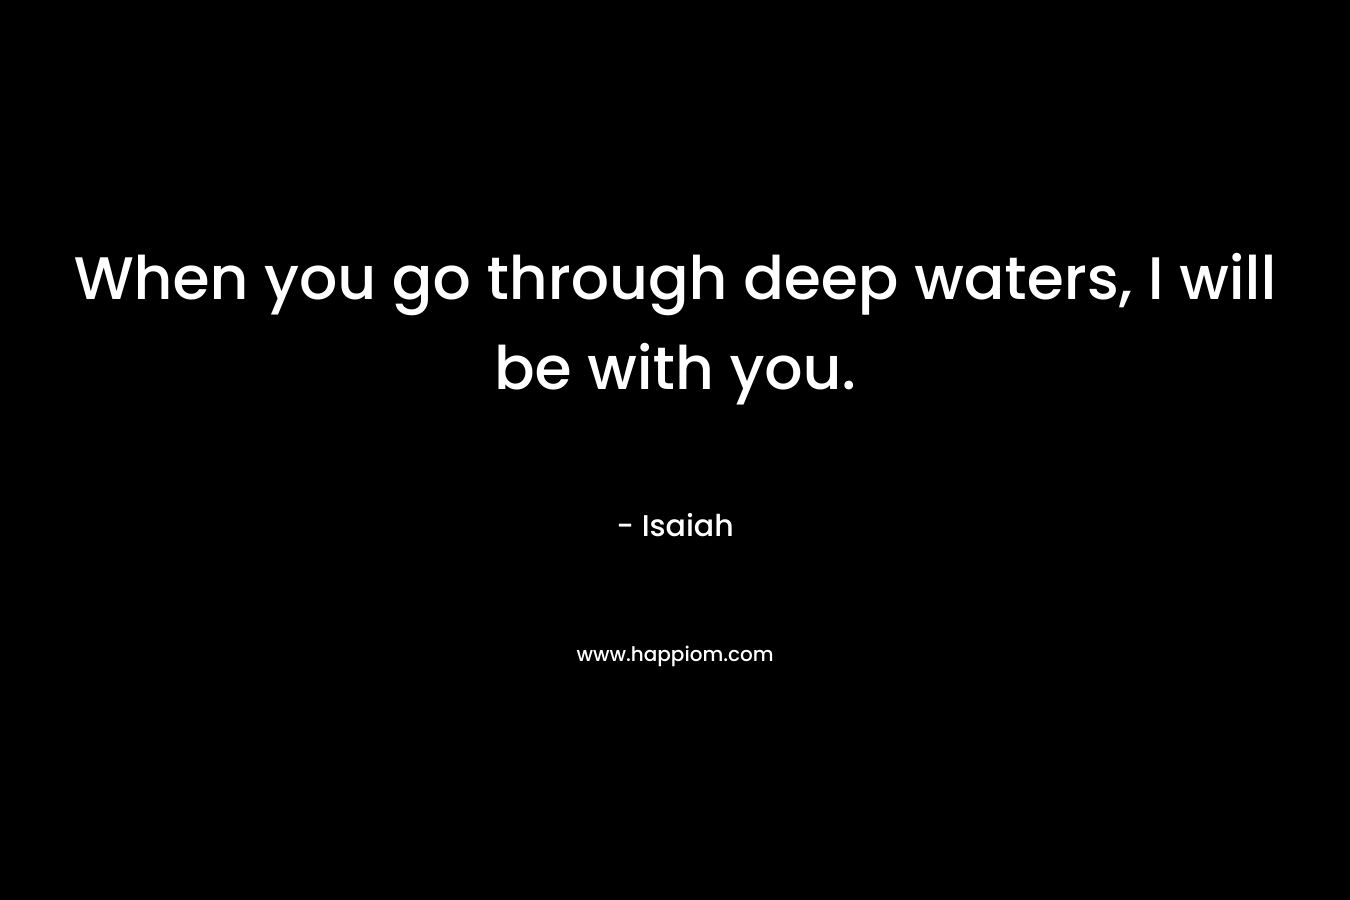 When you go through deep waters, I will be with you. – Isaiah